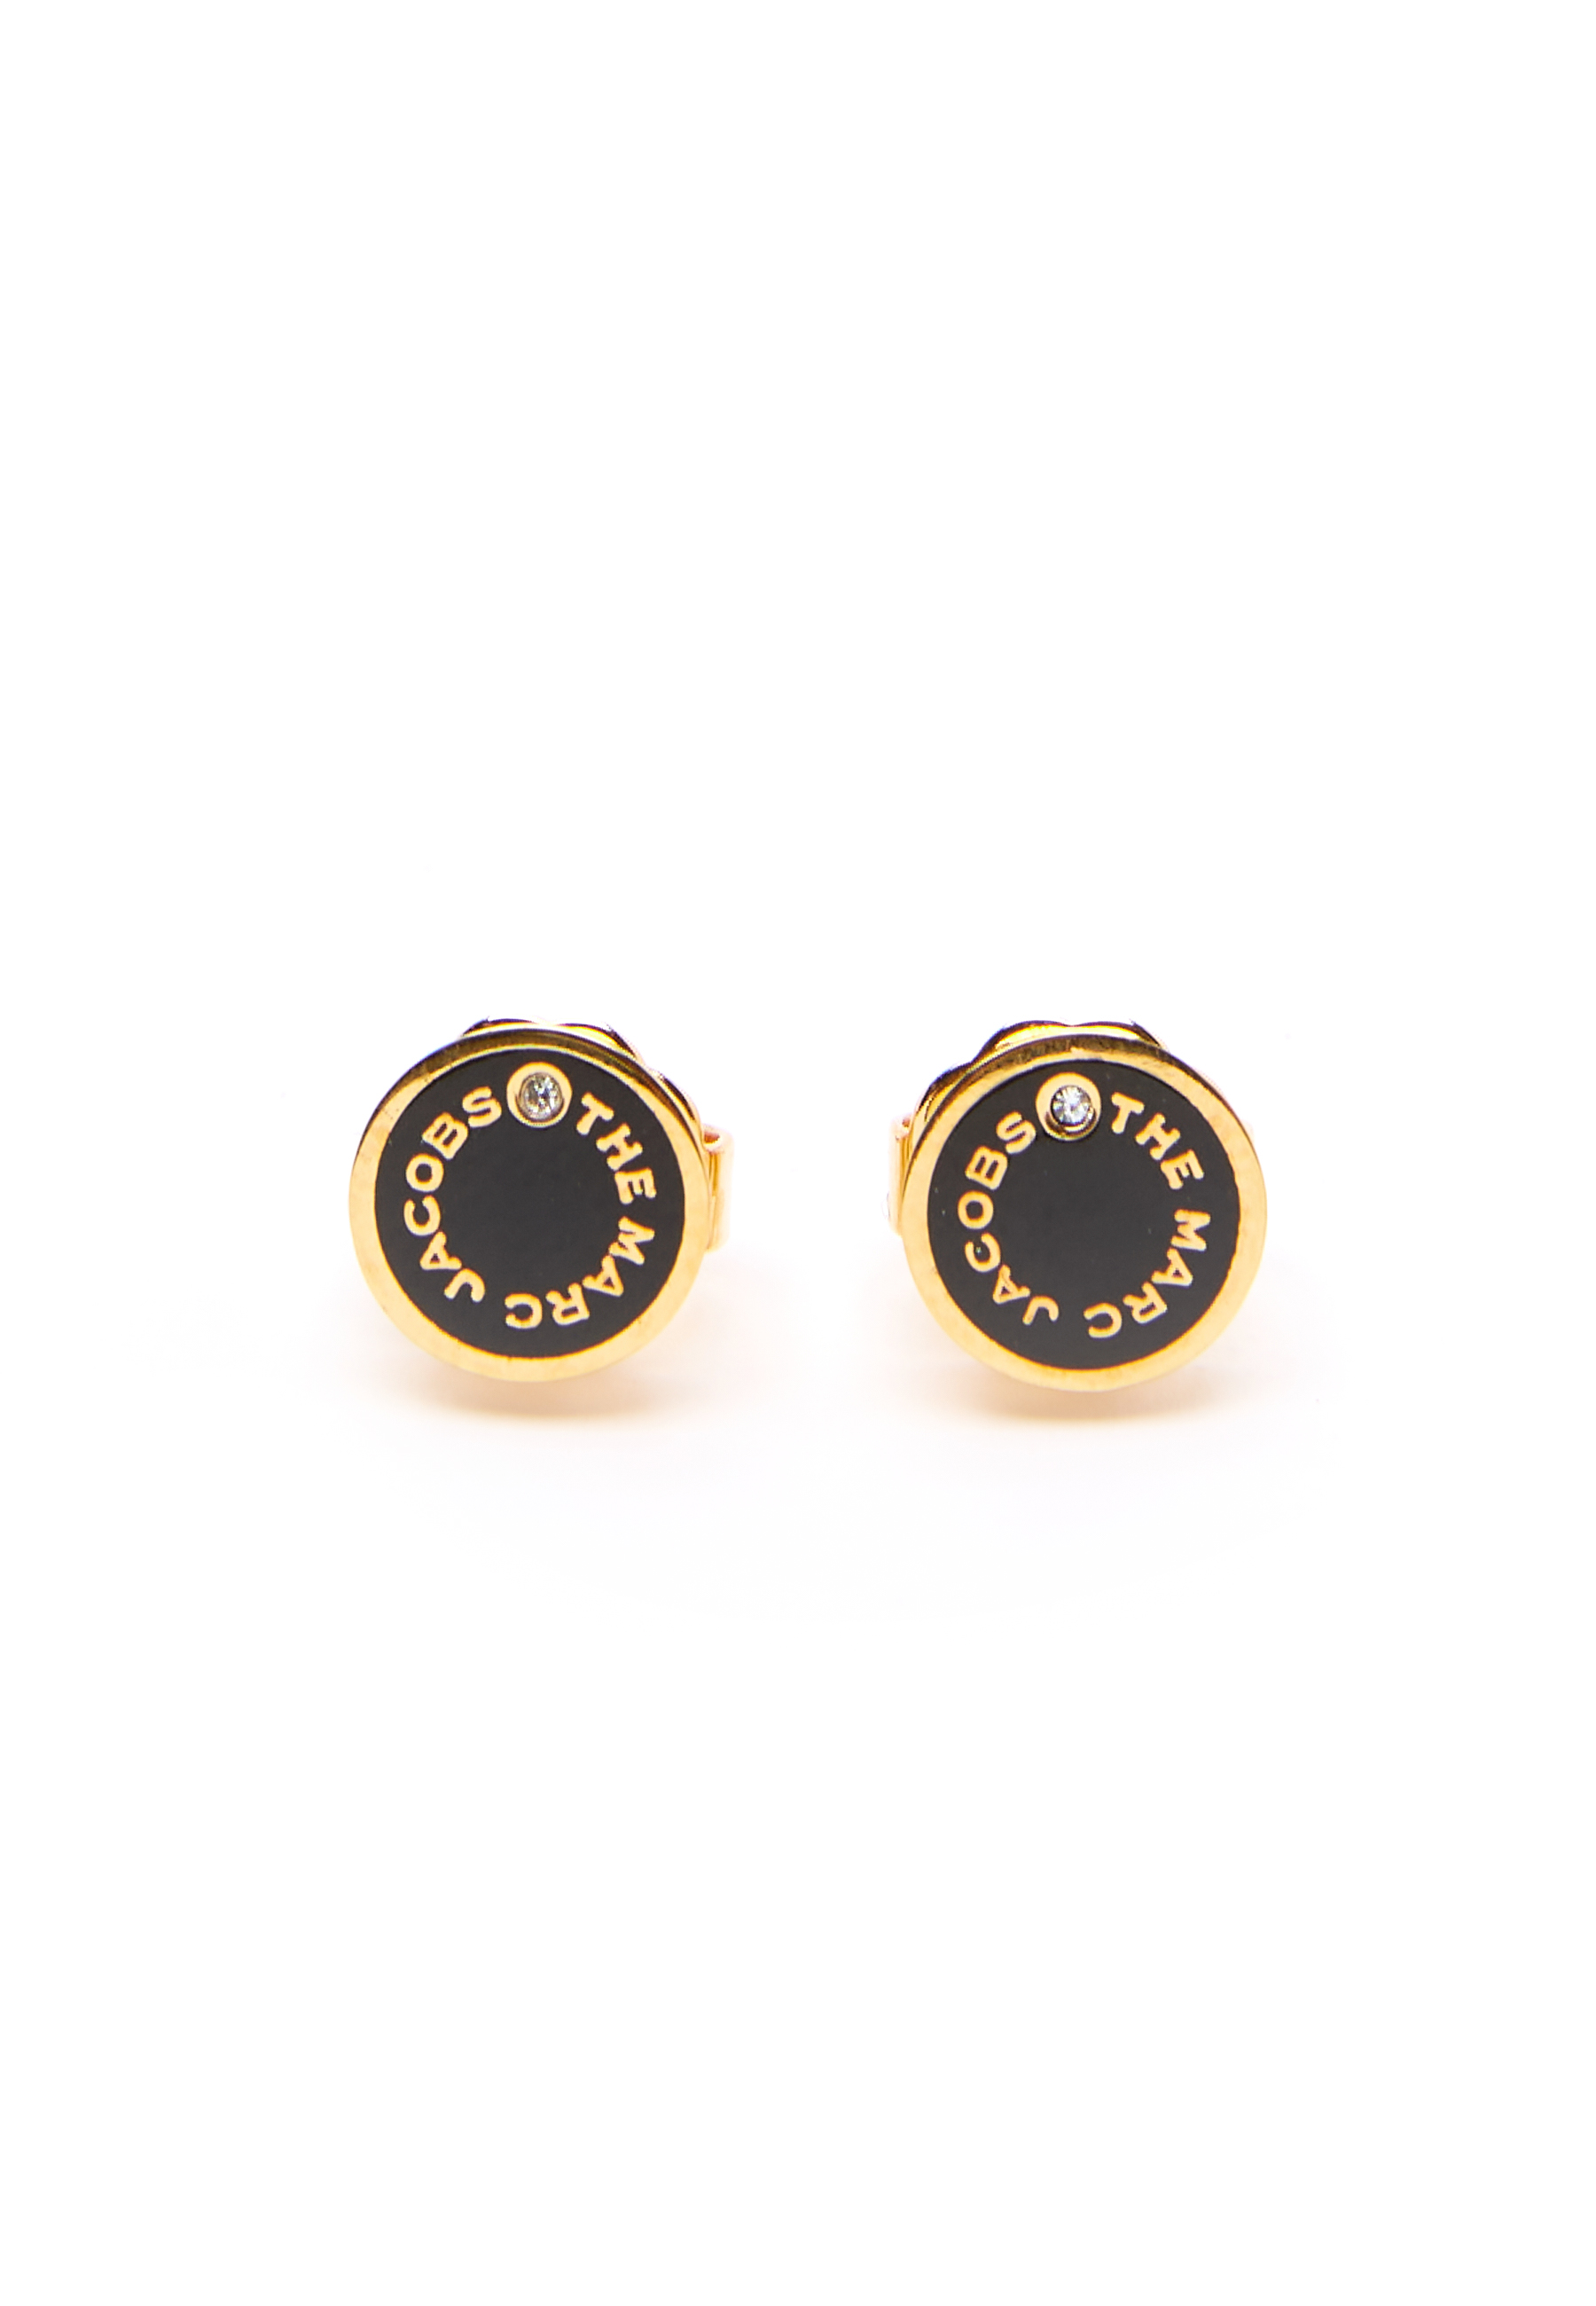 Marc Jacobs (THE) The Medallion Earrings 001 Black/Gold - Bubbleroom